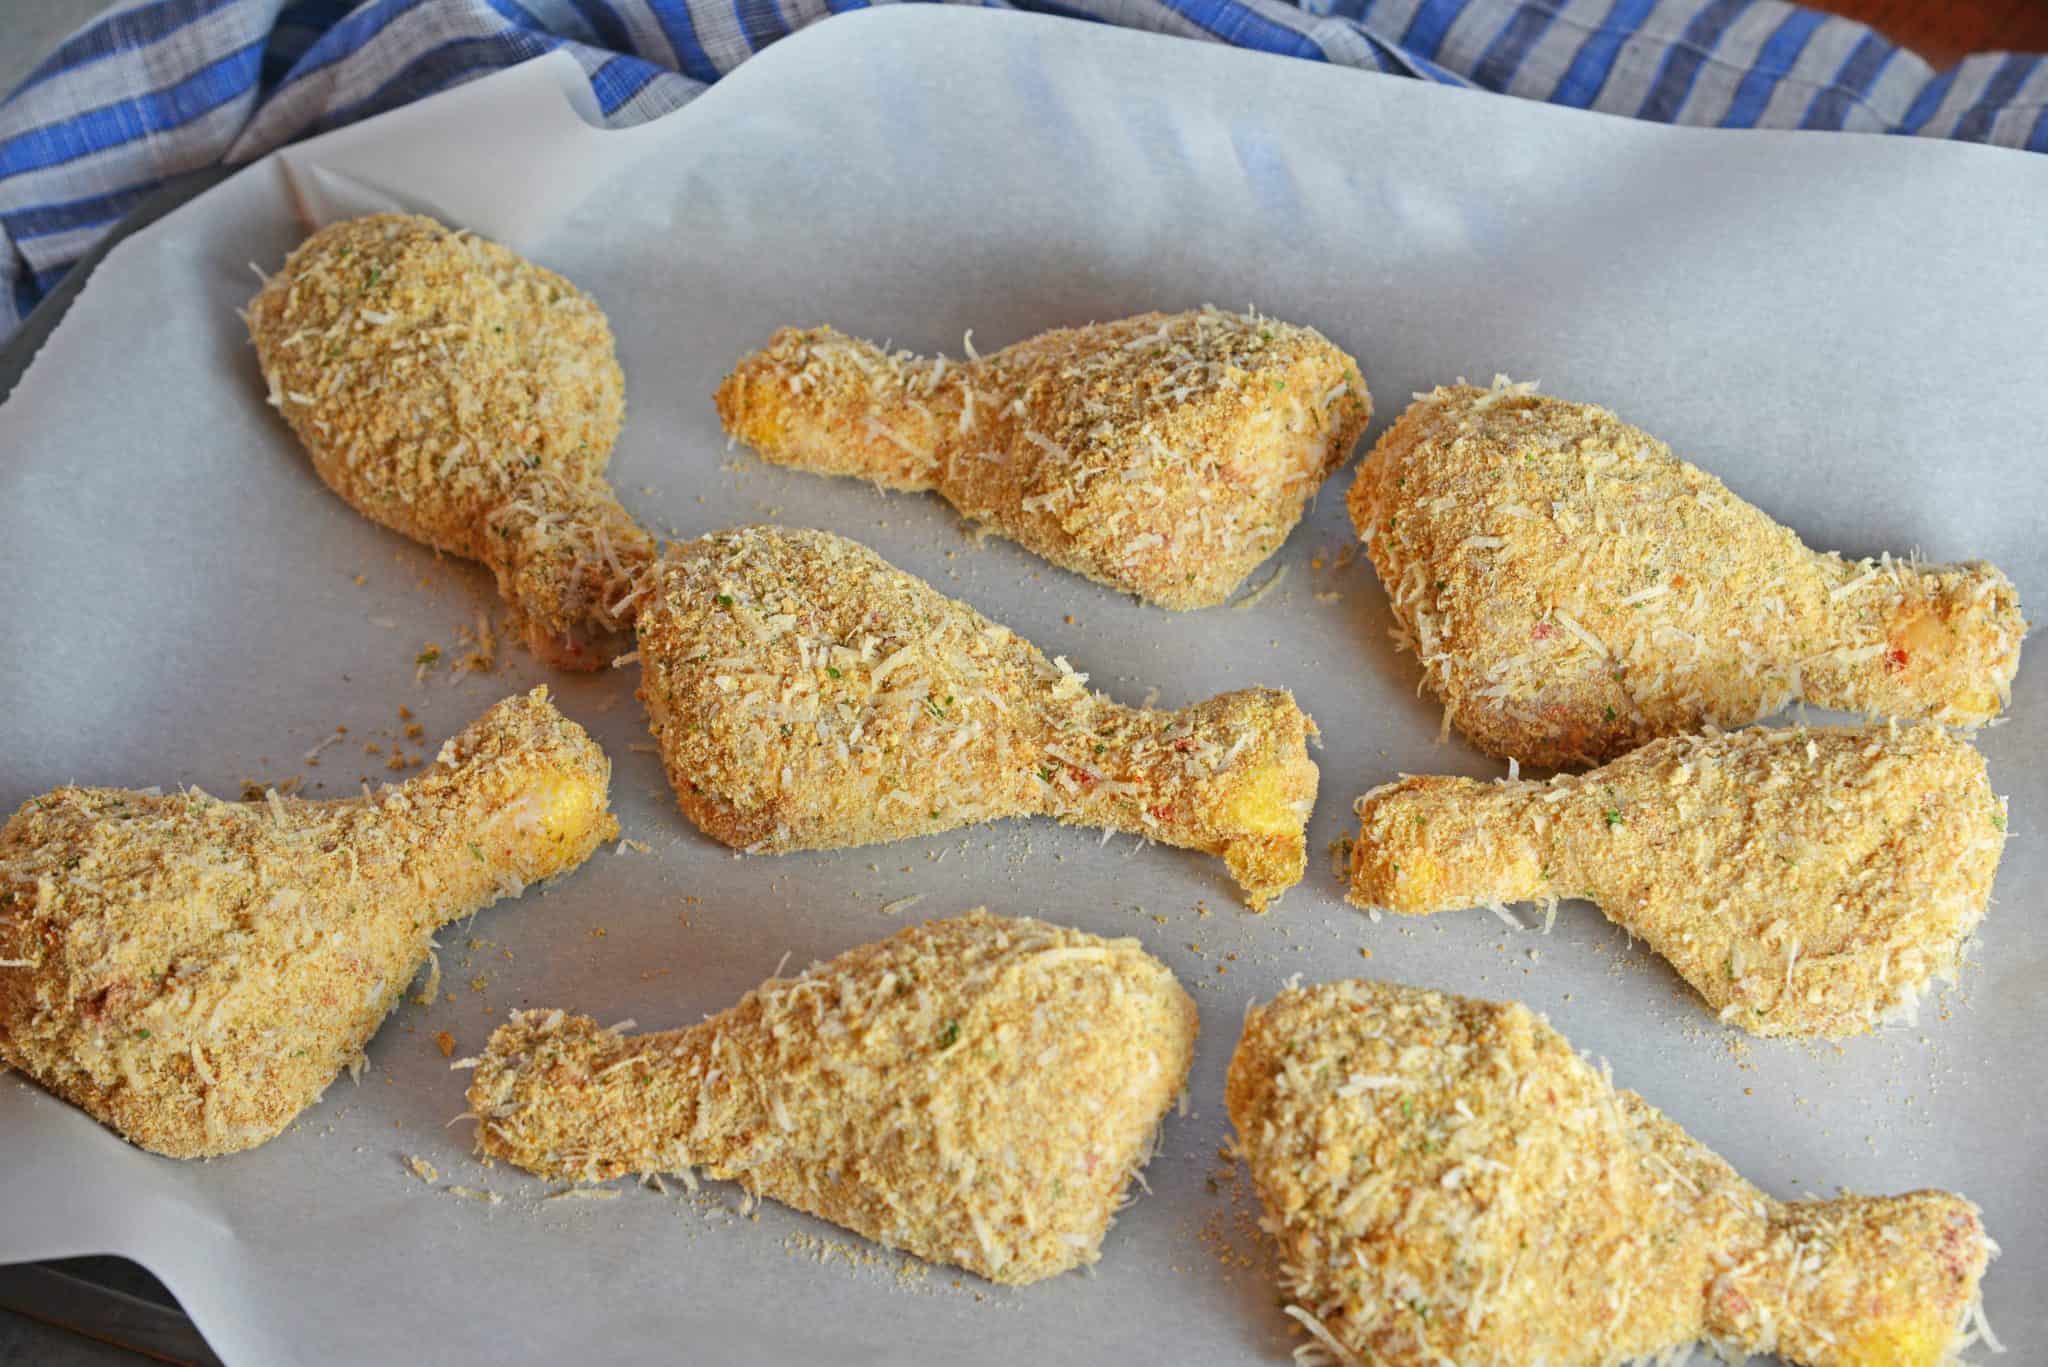 Crispy Baked Chicken is a melt-in-your-mouth oven fried chicken with tongue-tingling flavor that will leave you craving more. #crispybakedchicken #ovenbakedchicken #bestovenfriedchicken www.savoryexperiments.com